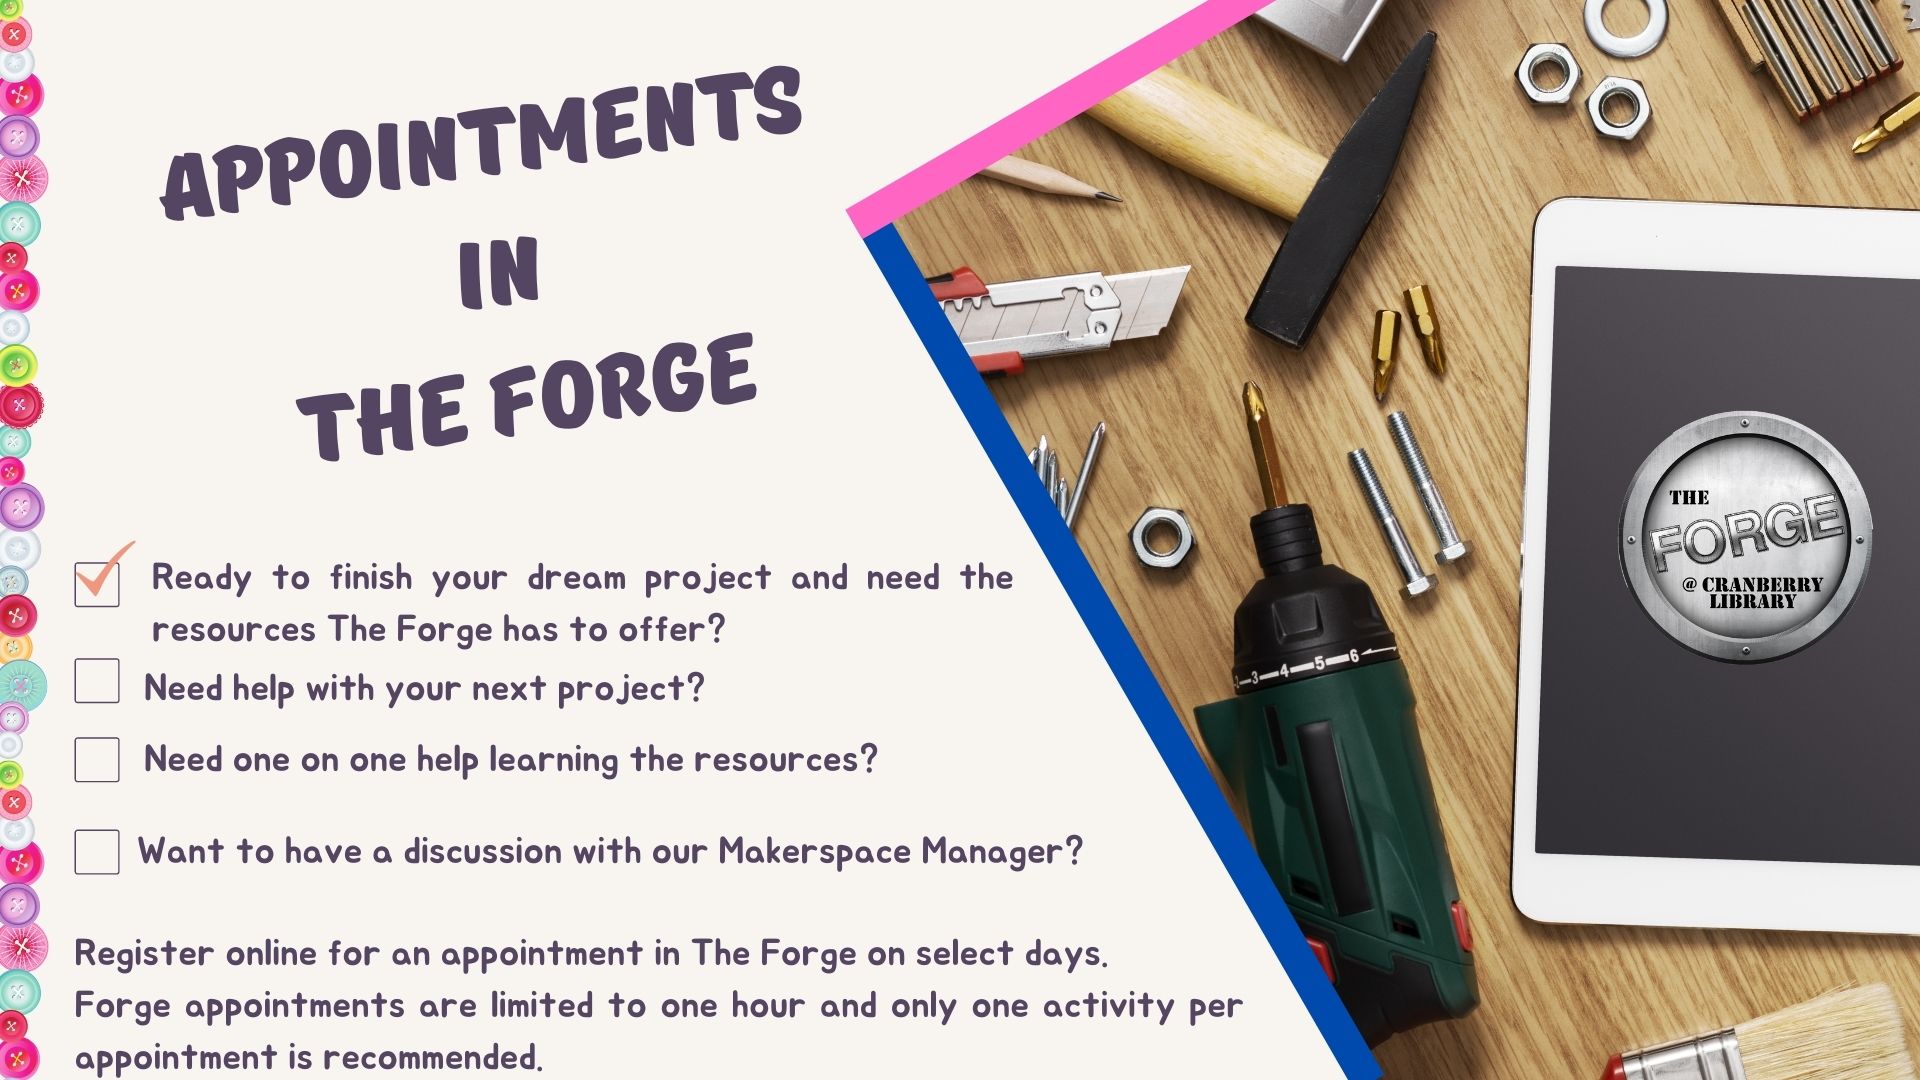 Appointments in The Forge flyer